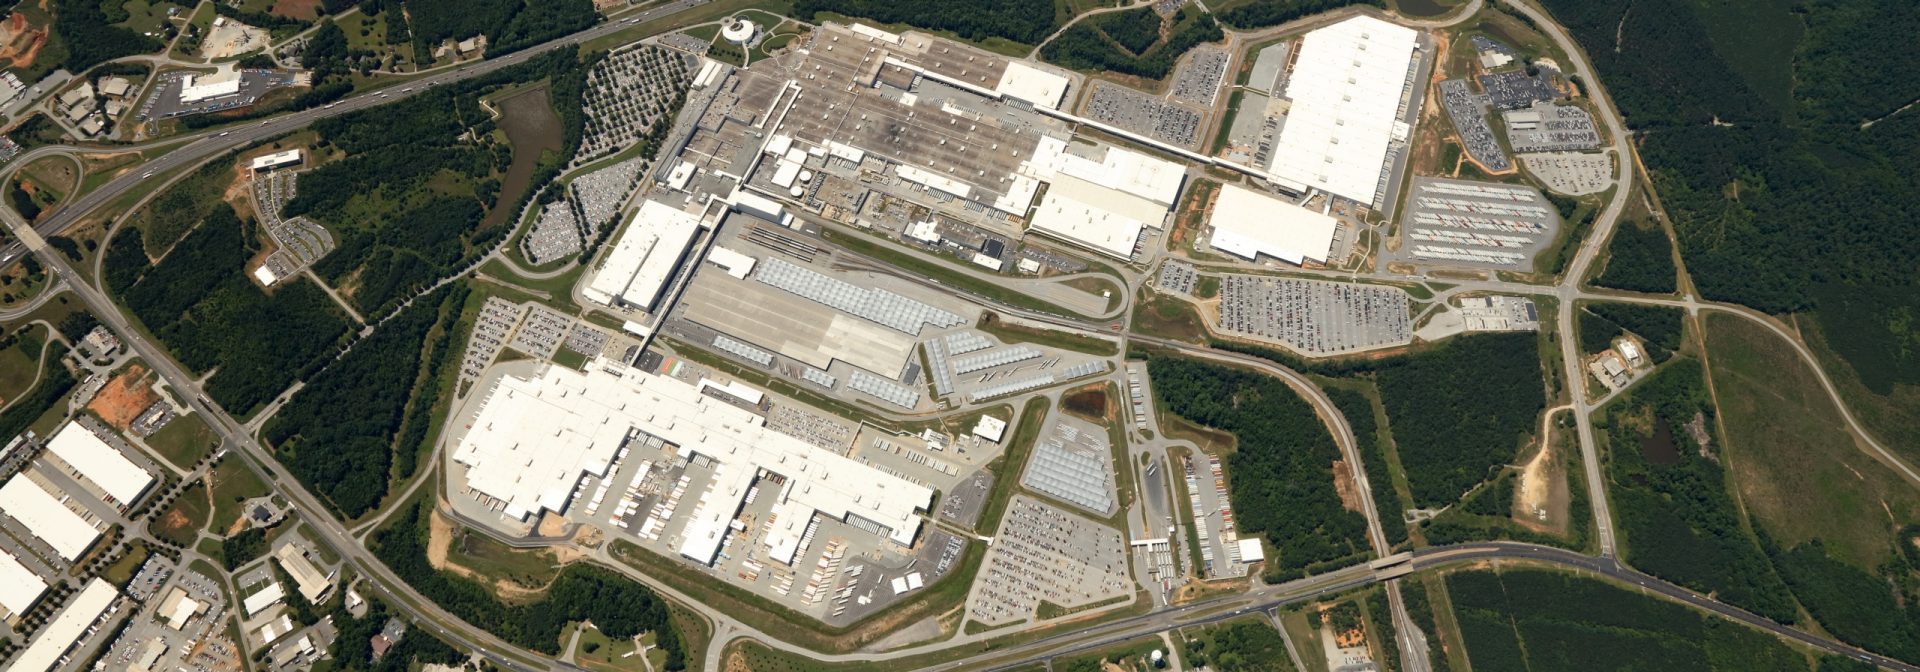 Overhead view of the plant site with interstate 85 to the left of the plant. 